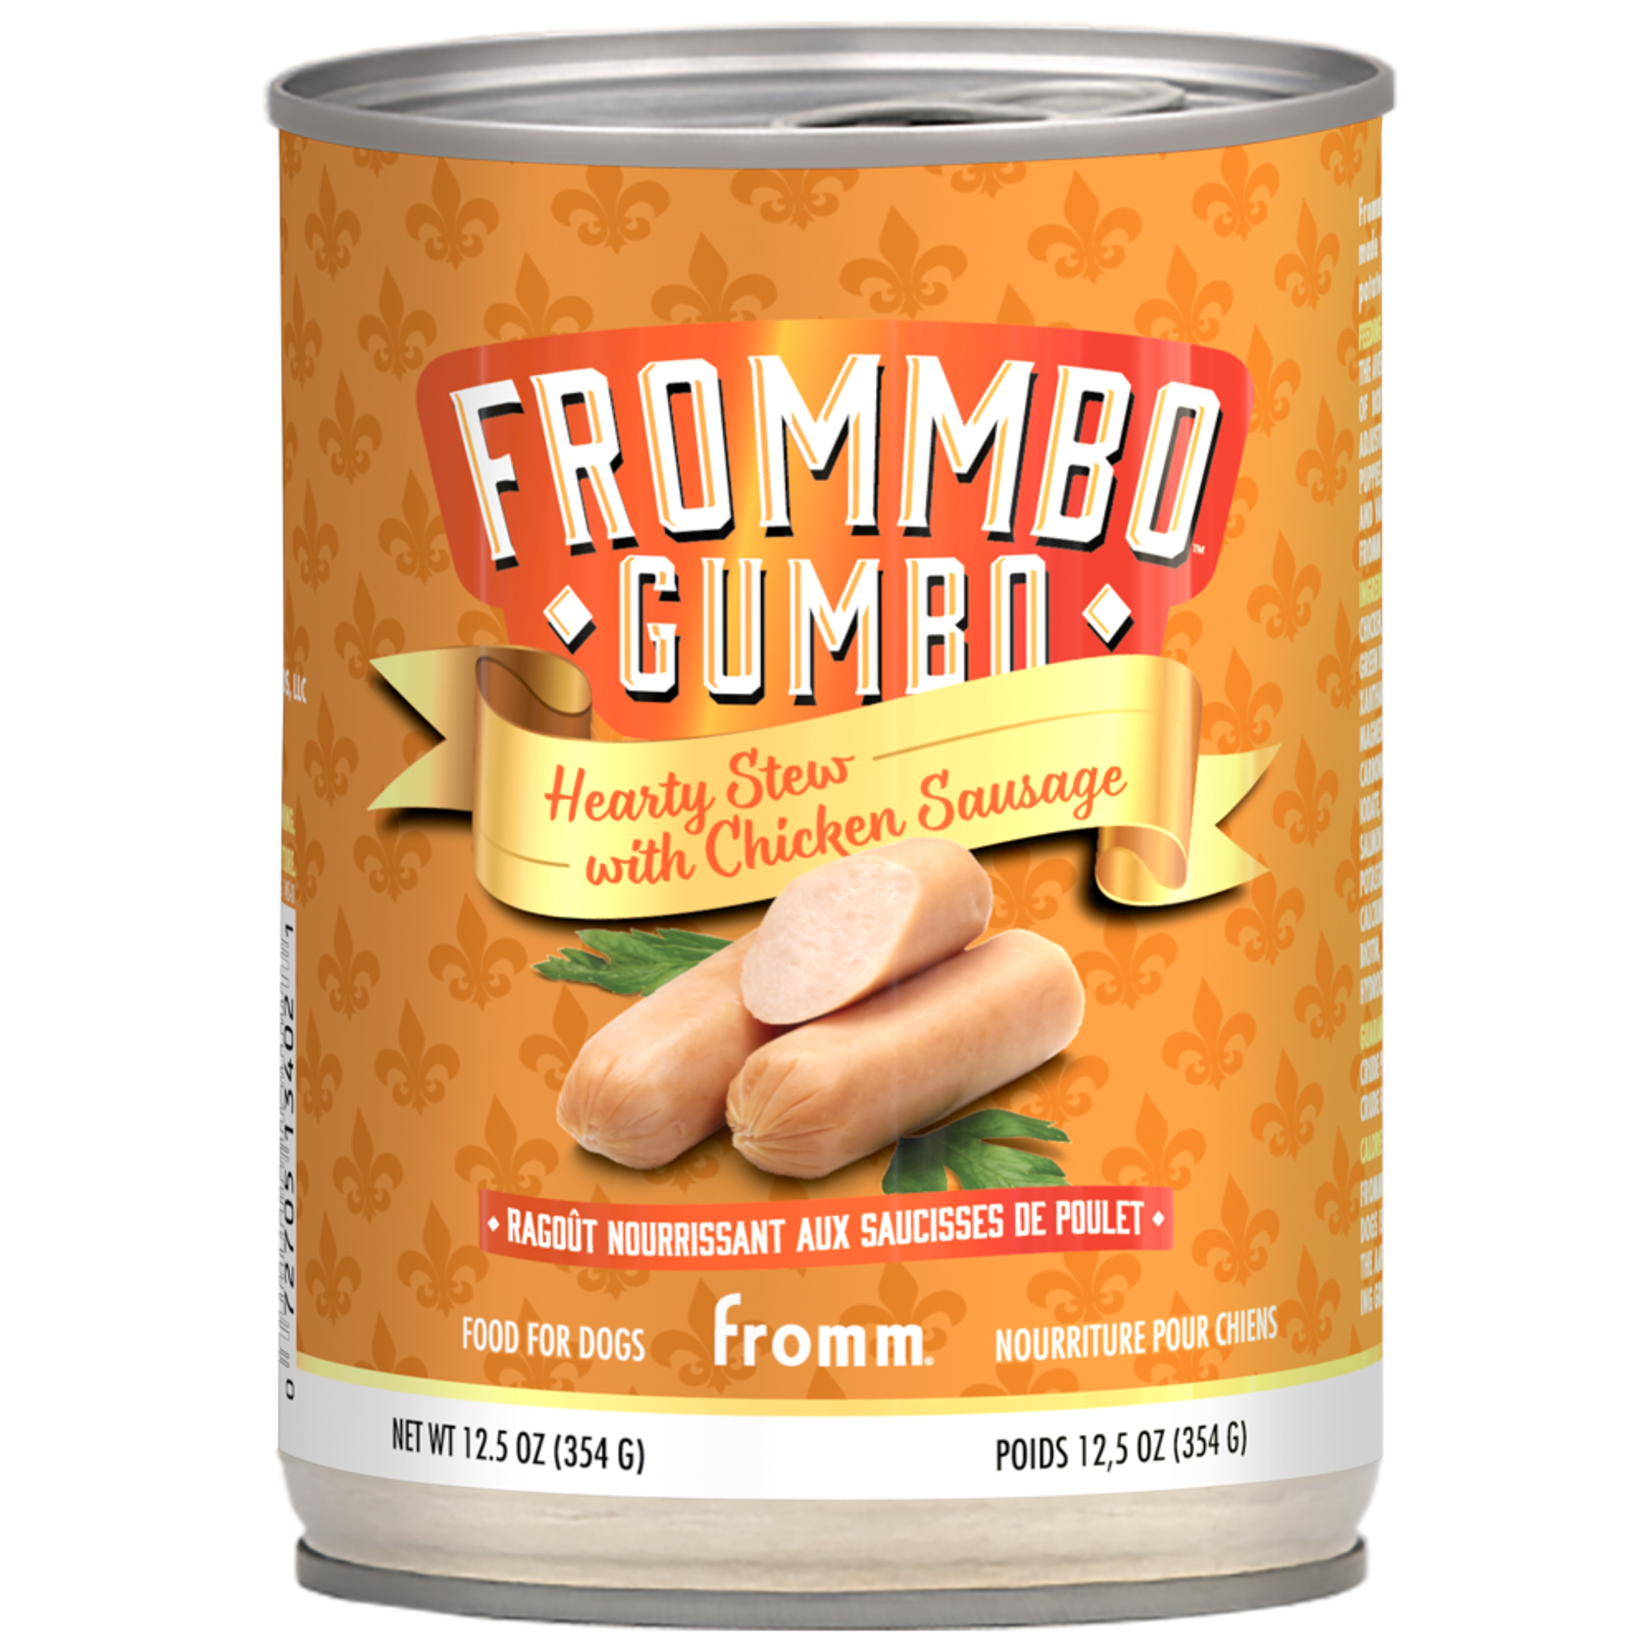 Fromm Frommbo Gumbo Hearty Stew with Chicken Sausage 12.5 oz